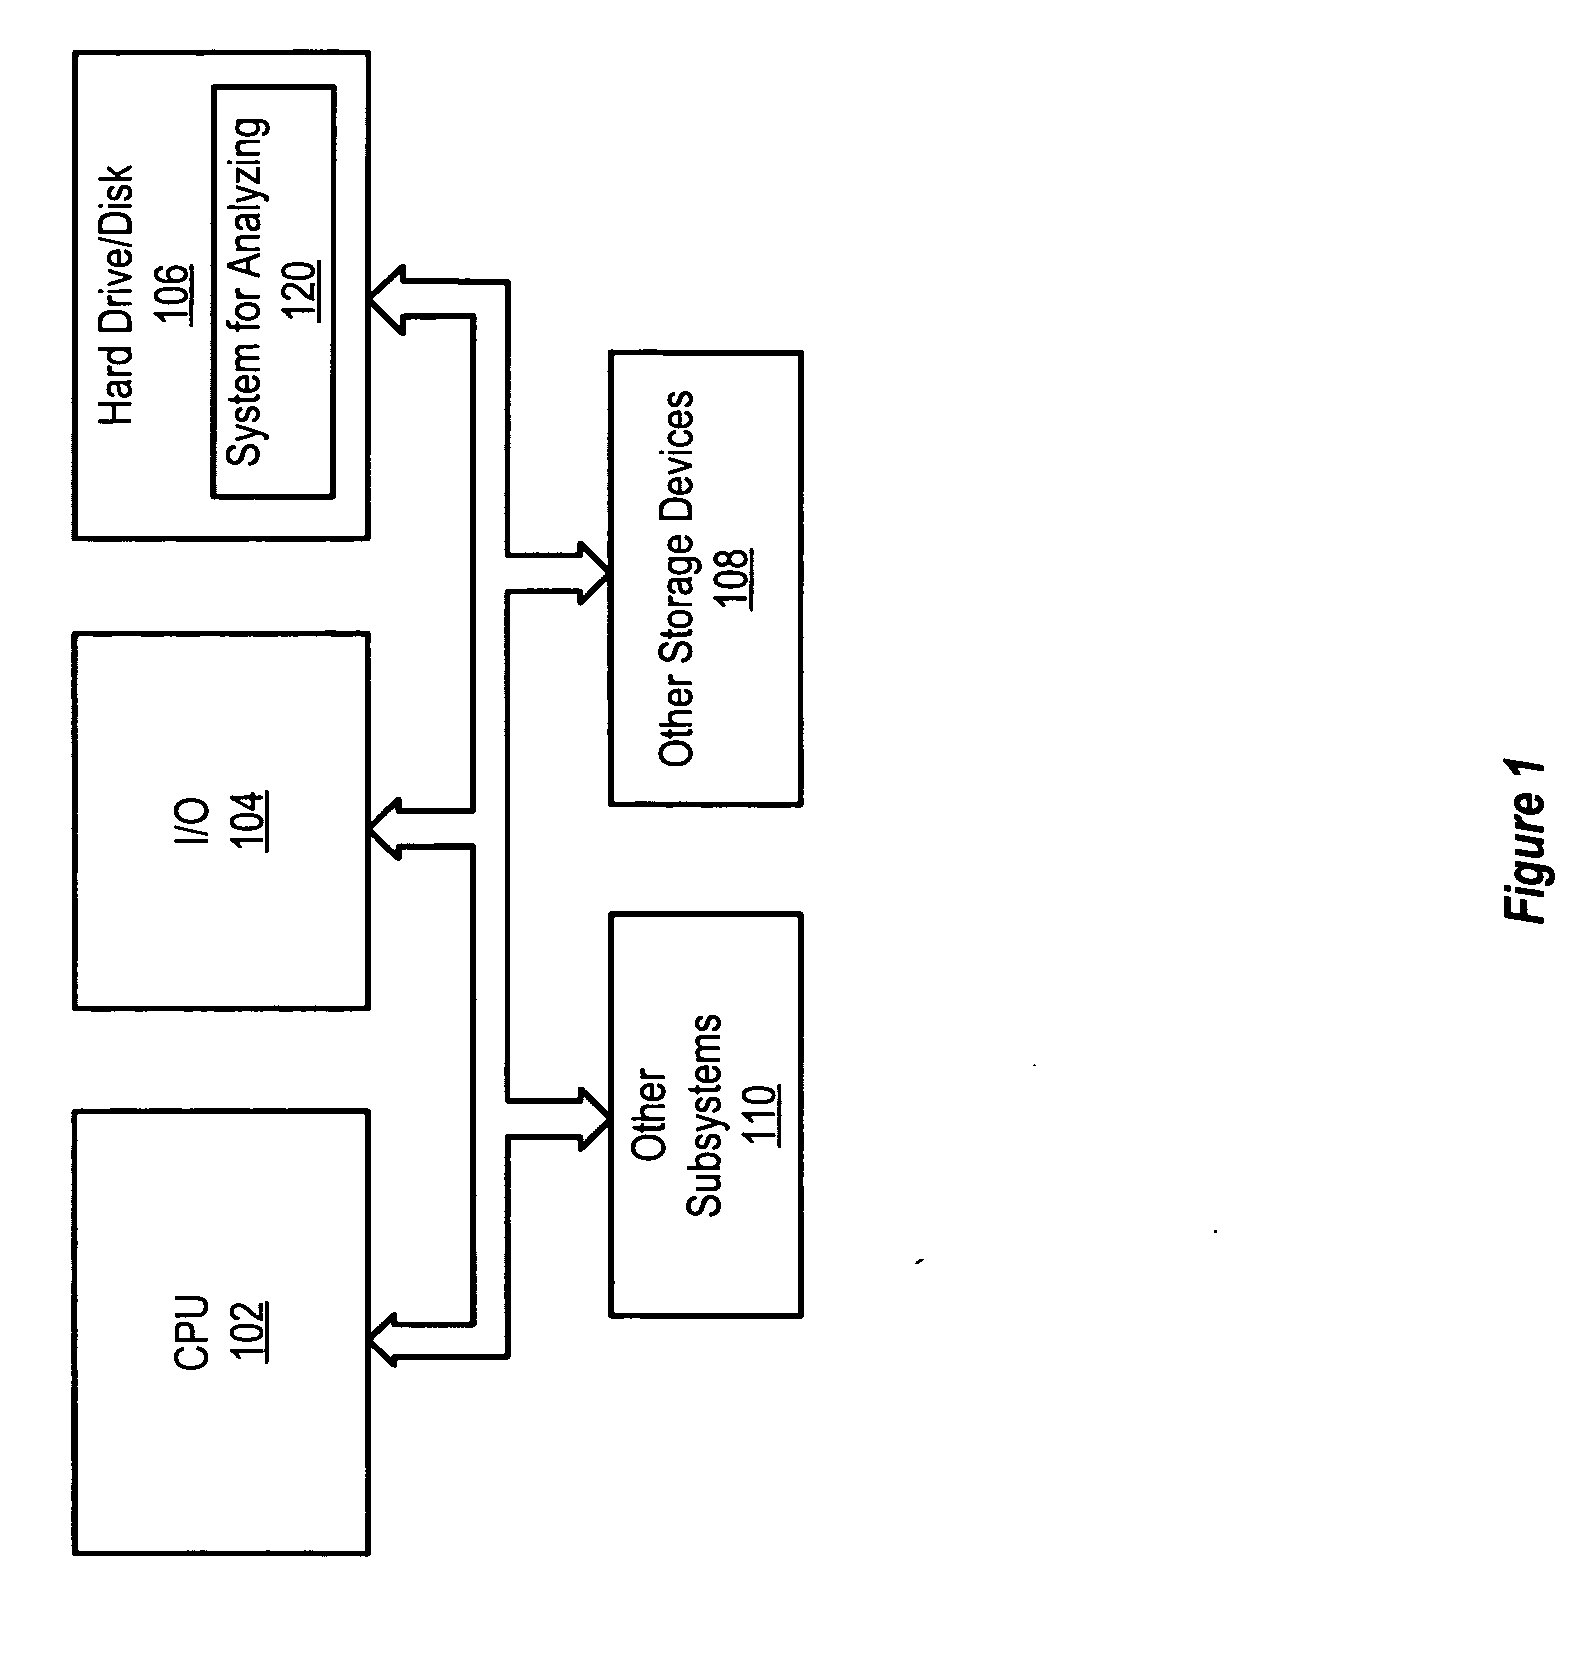 Conductor arrangement for reduced noise differential signalling